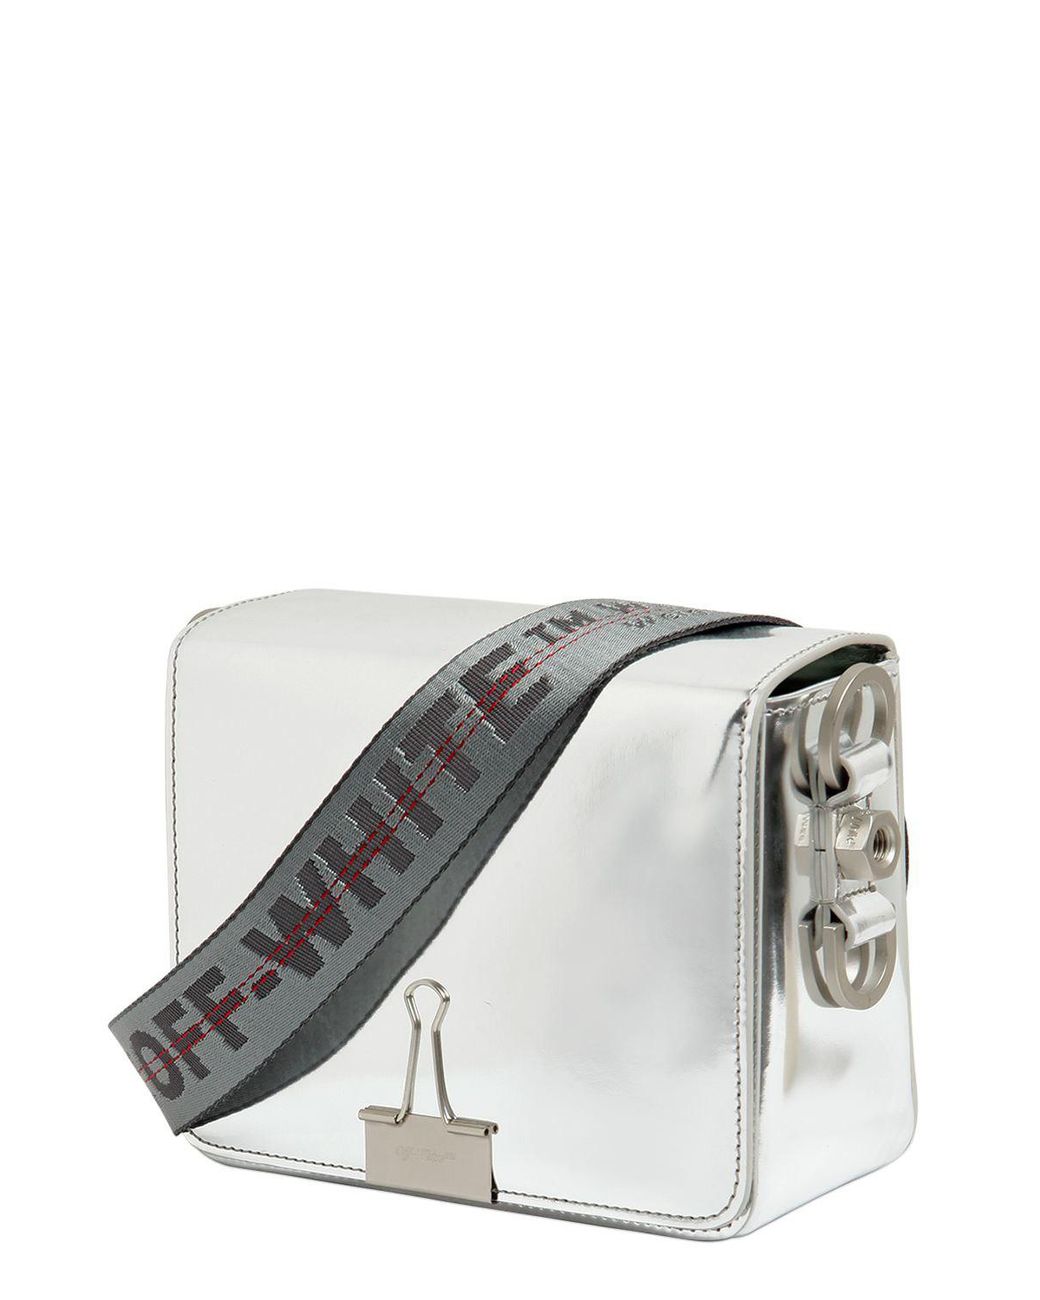 Binder patent leather crossbody bag Off-White Metallic in Patent leather -  23364554